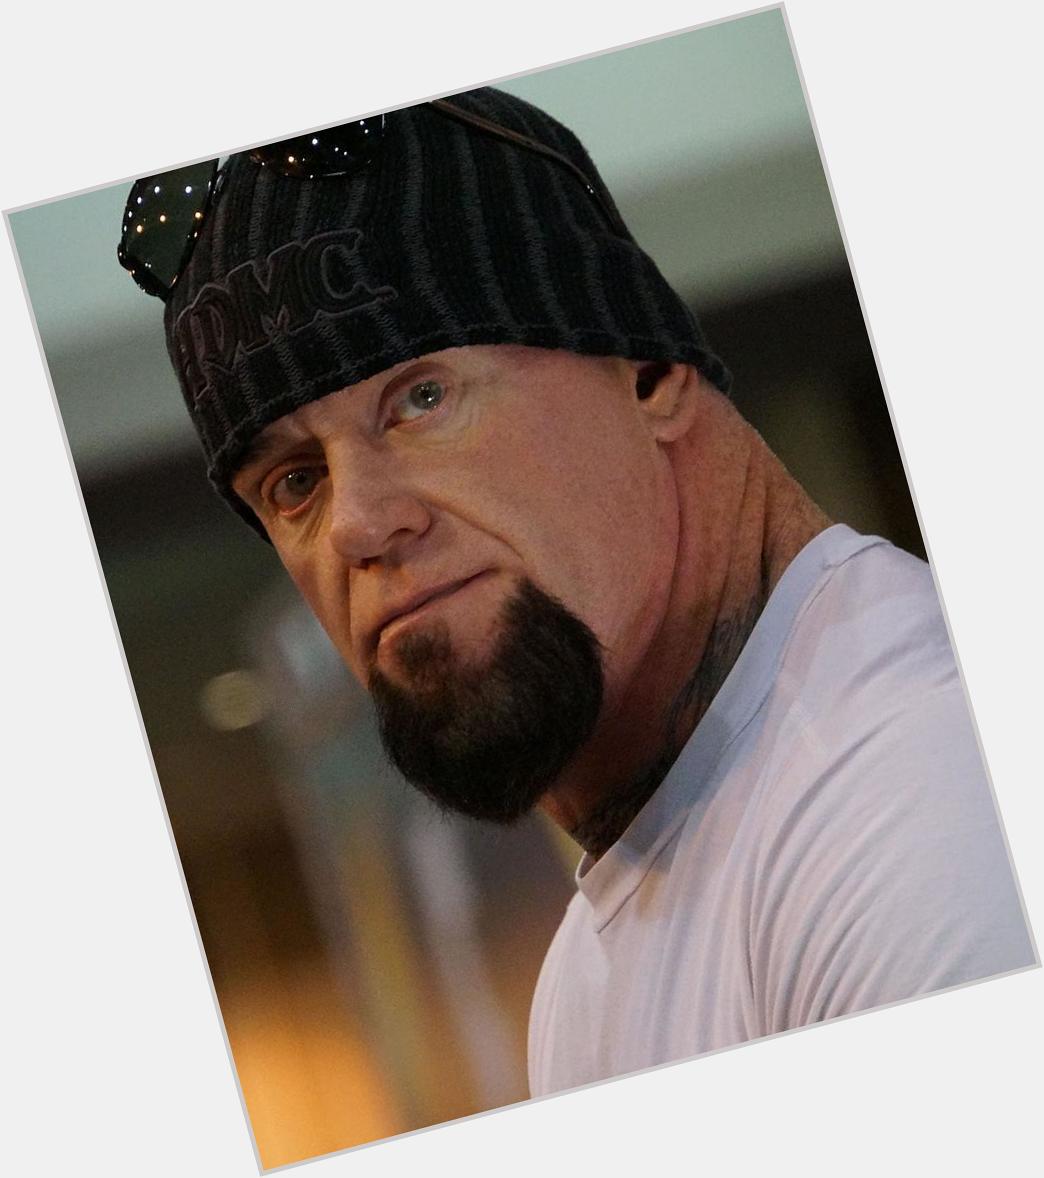 Happy 50th Birthday The Undertaker! You sir are a Legend! 